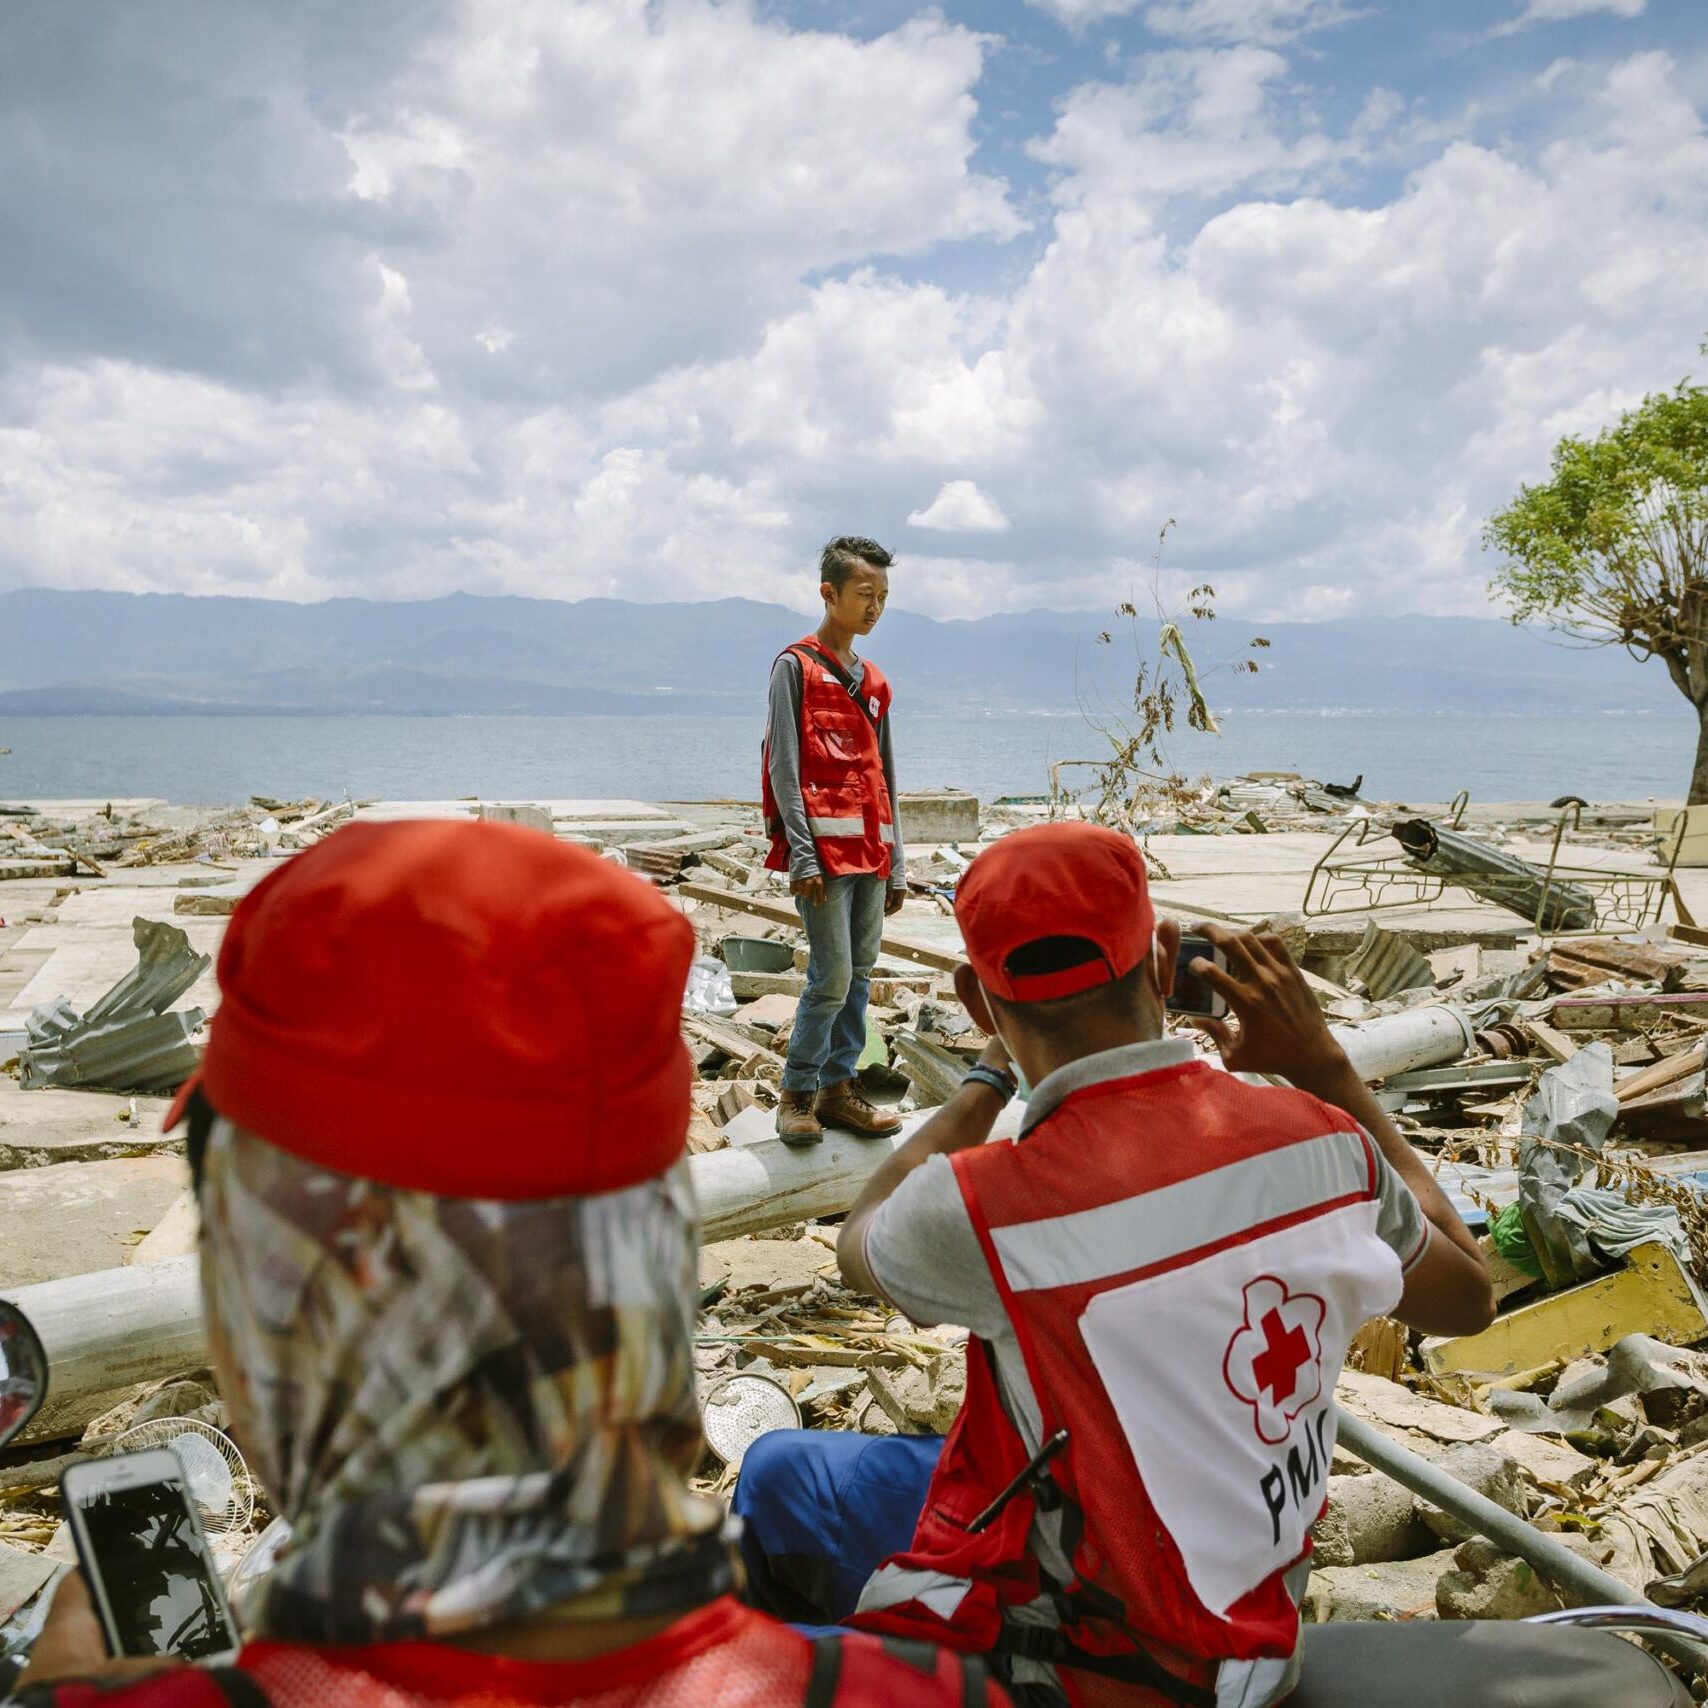 Relief efforts after earthquake and tsunami in Indonesia